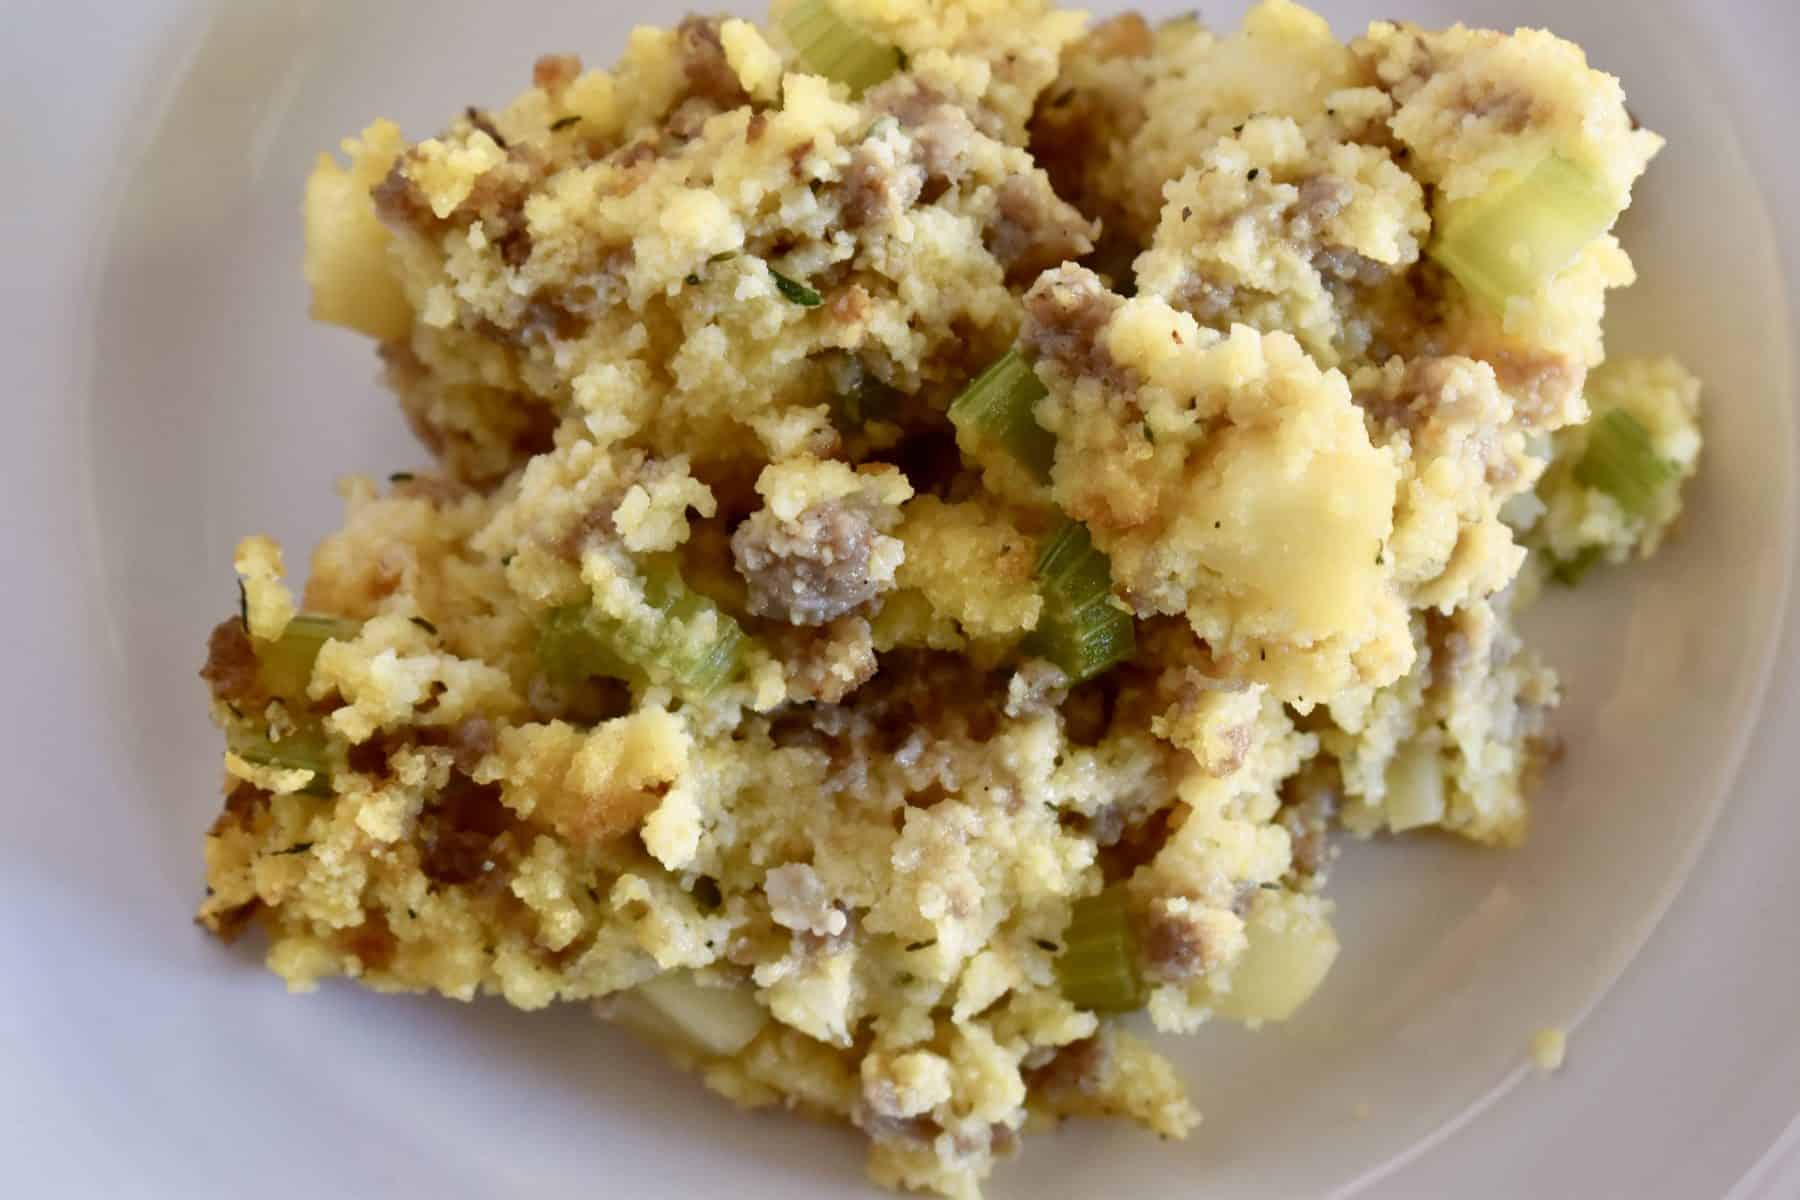 cornbread stuffing with sausage and apples